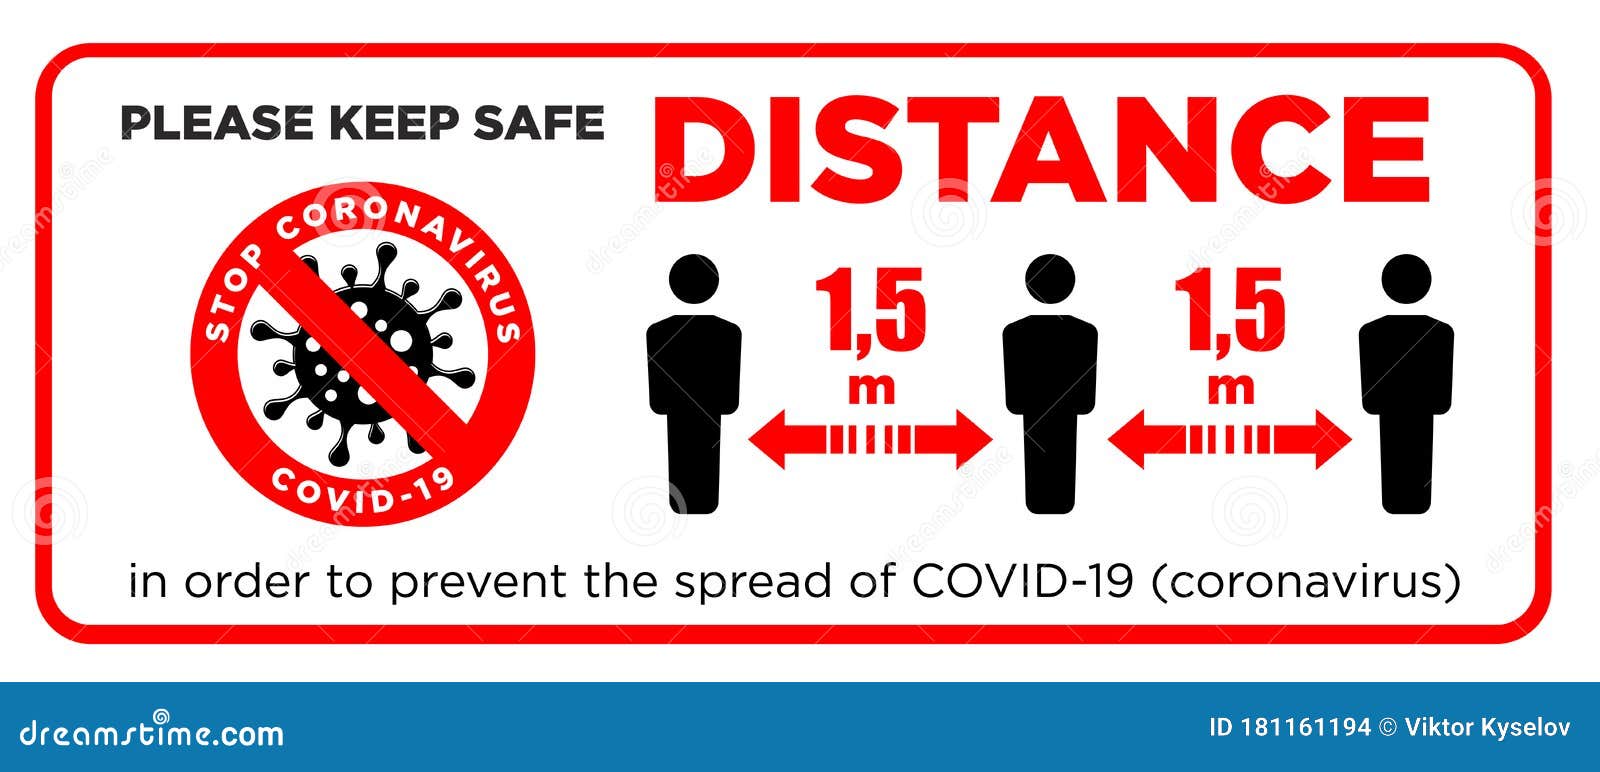 Quarantine Signs 2m Keep Distance Patch Social distancing sew on Lockdown 